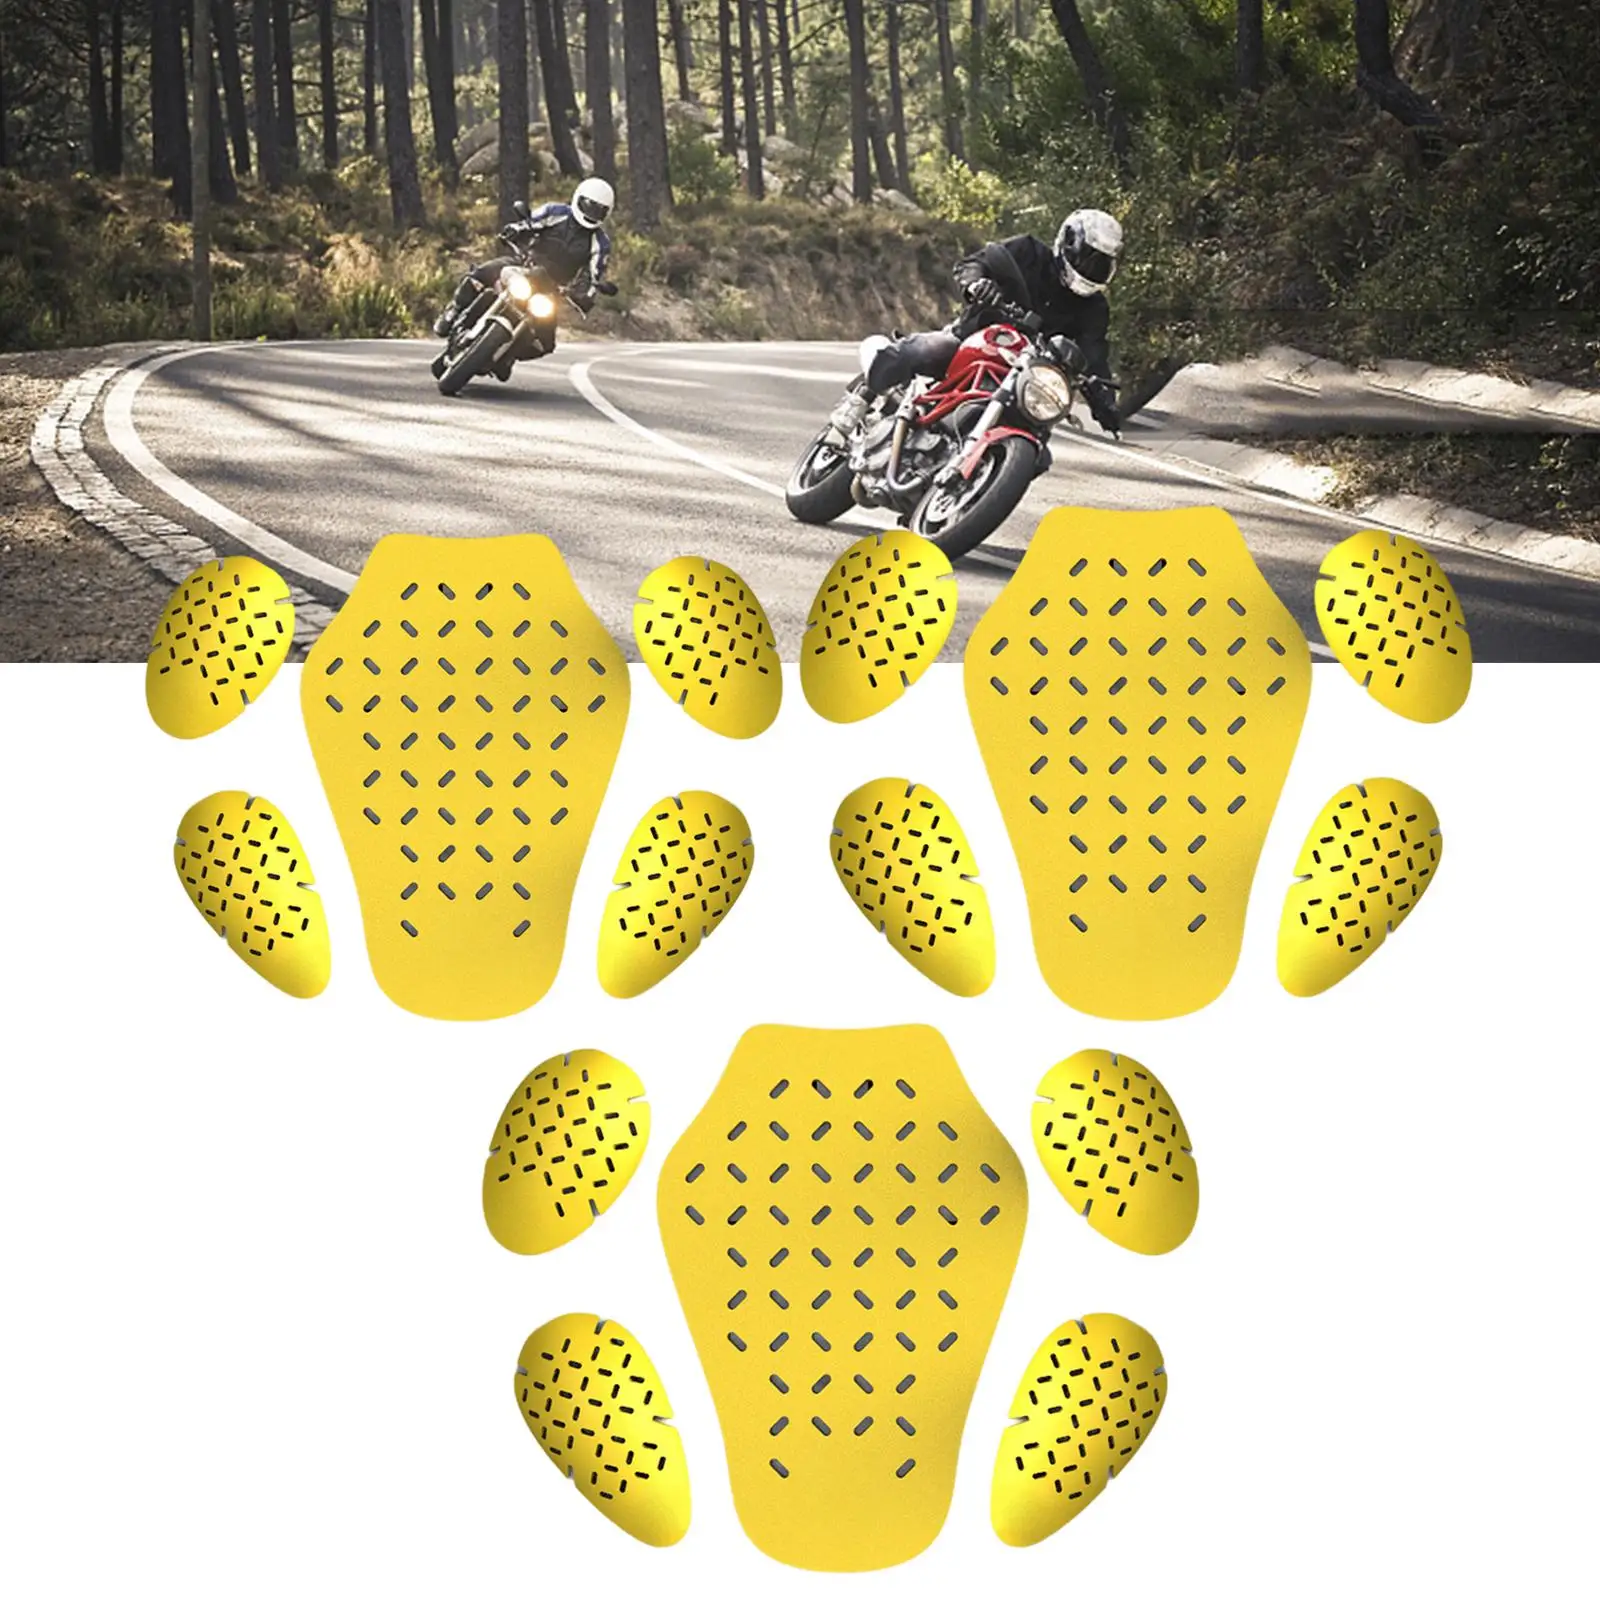 5 Pieces Armor Pads Armor Protection Pad for Back Shoulder and Elbows Motorcycle Street Biker Jackets Riding Cycling Unisex